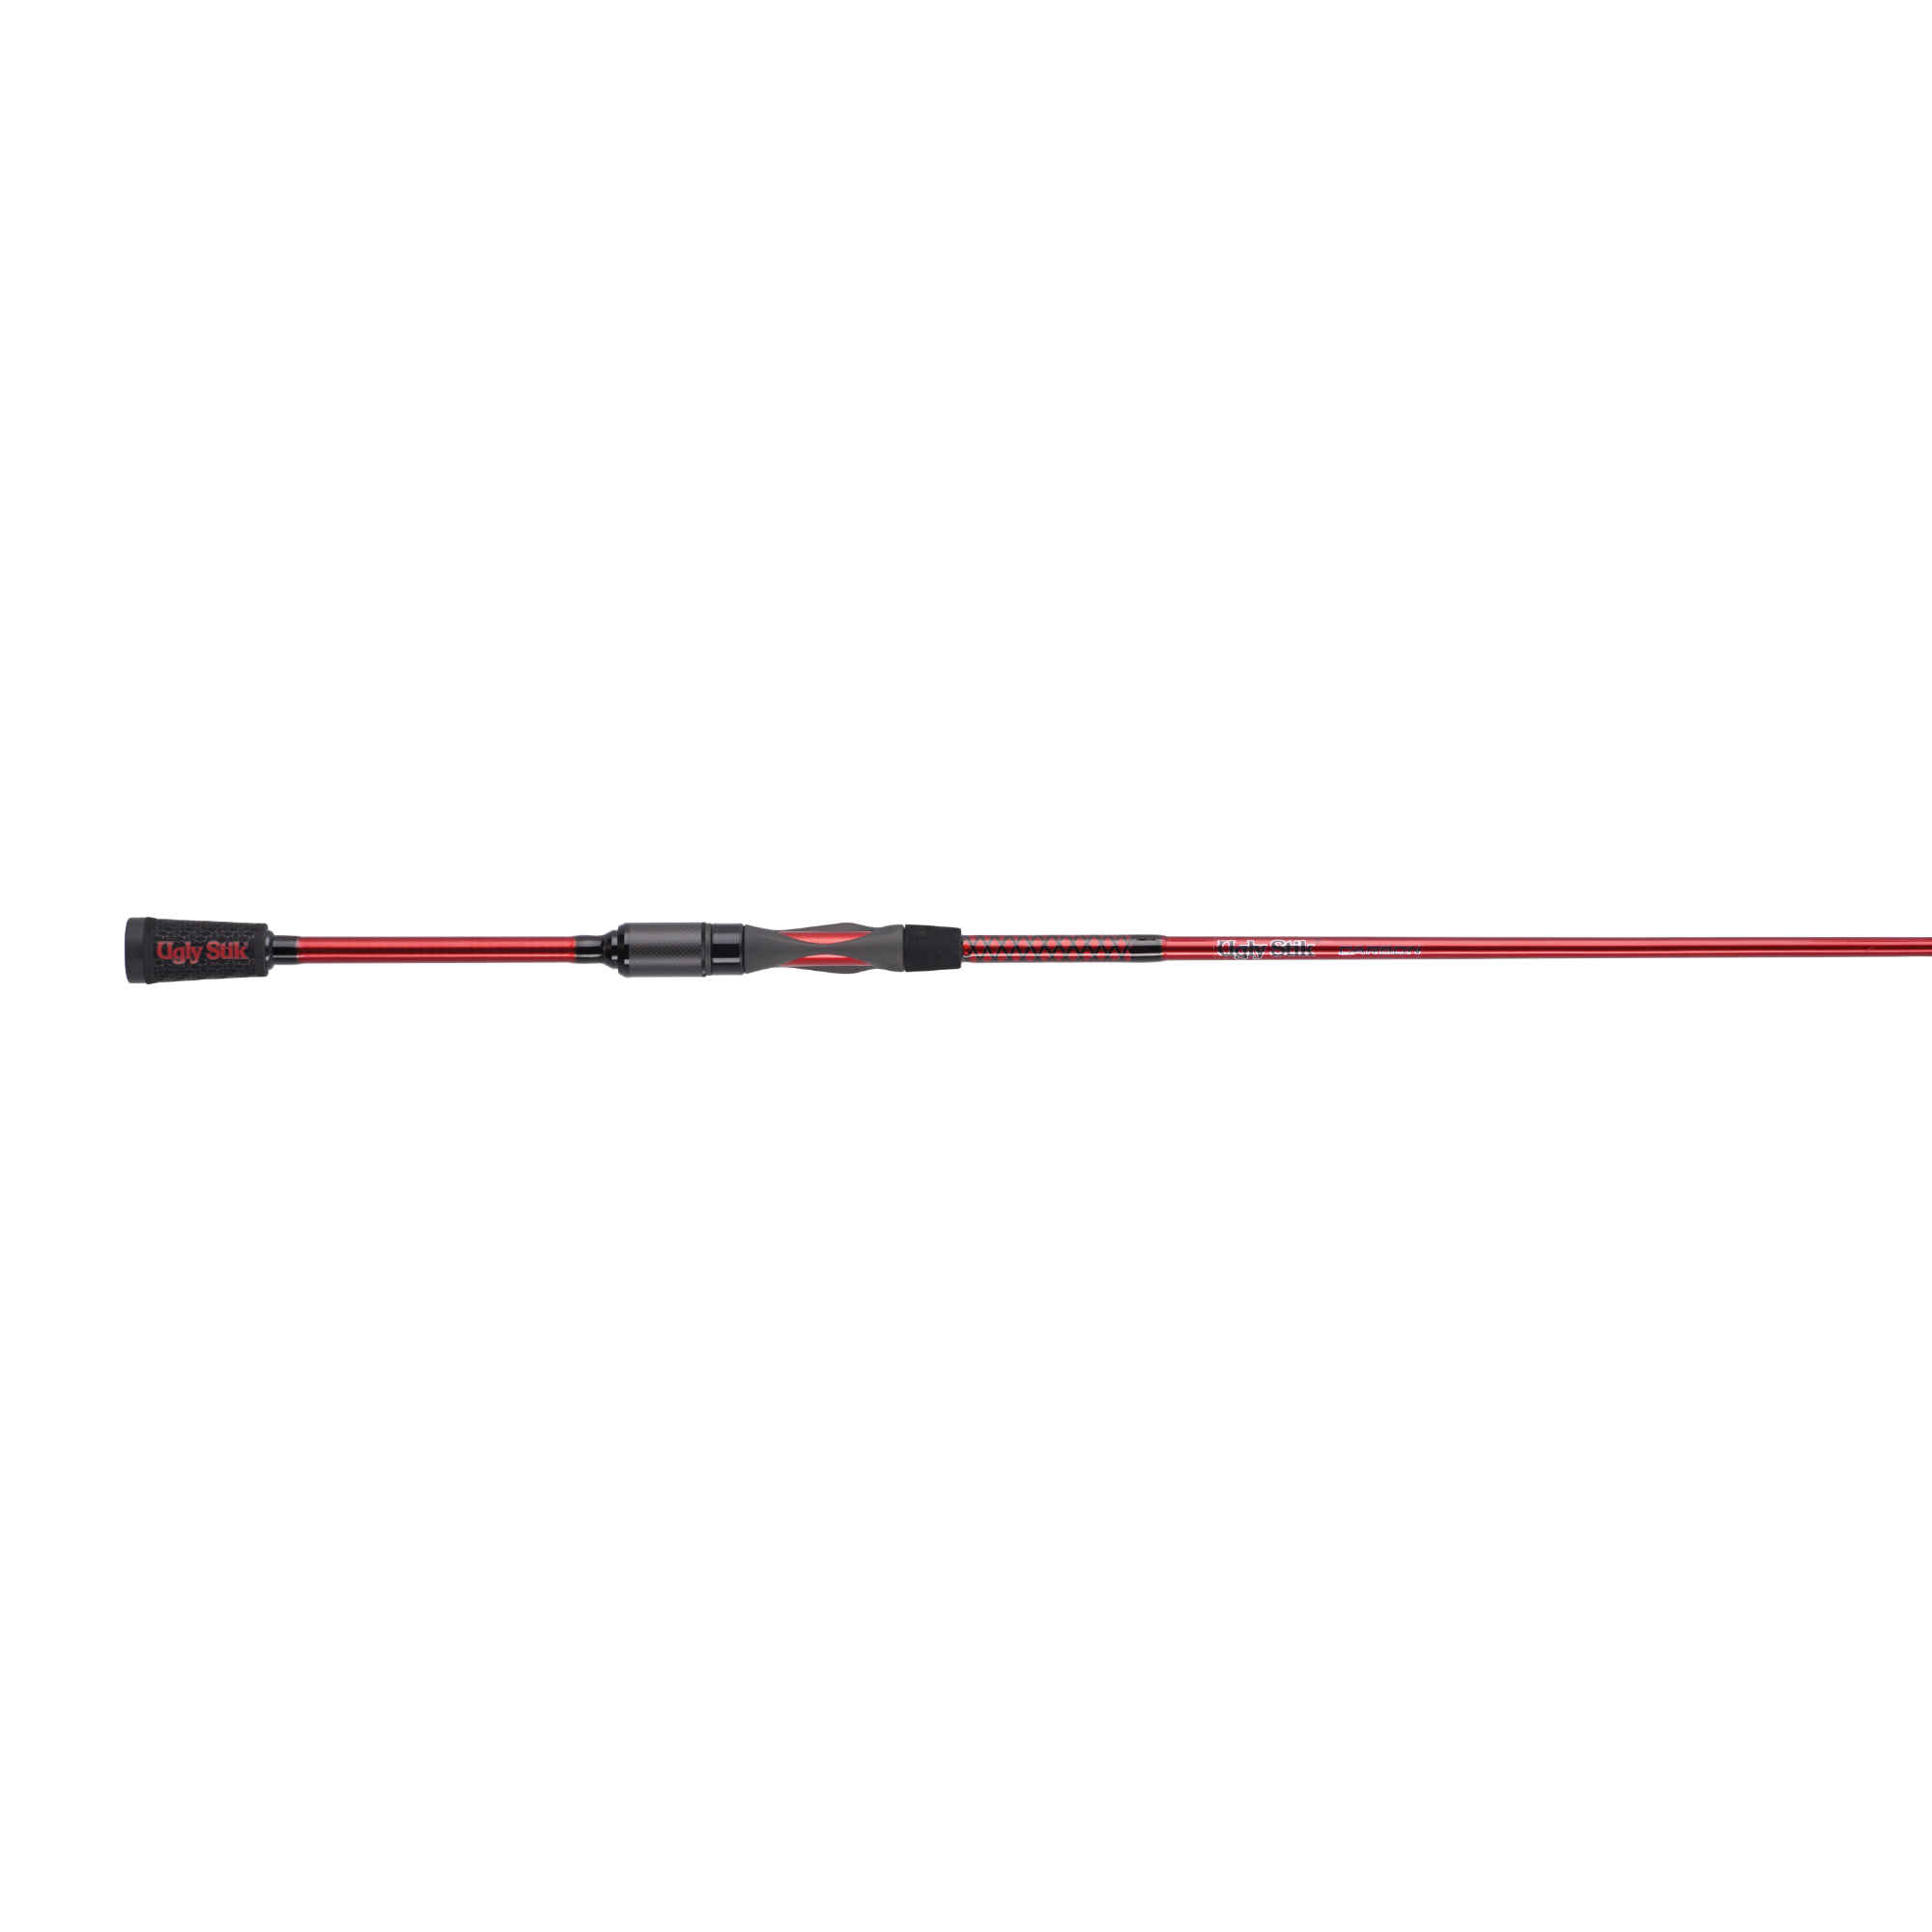 Ugly Stik Carbon Spinning Rod, 2 Piece, Medium, Fast, 8 Guides, 1/8-1/2oz  Lures